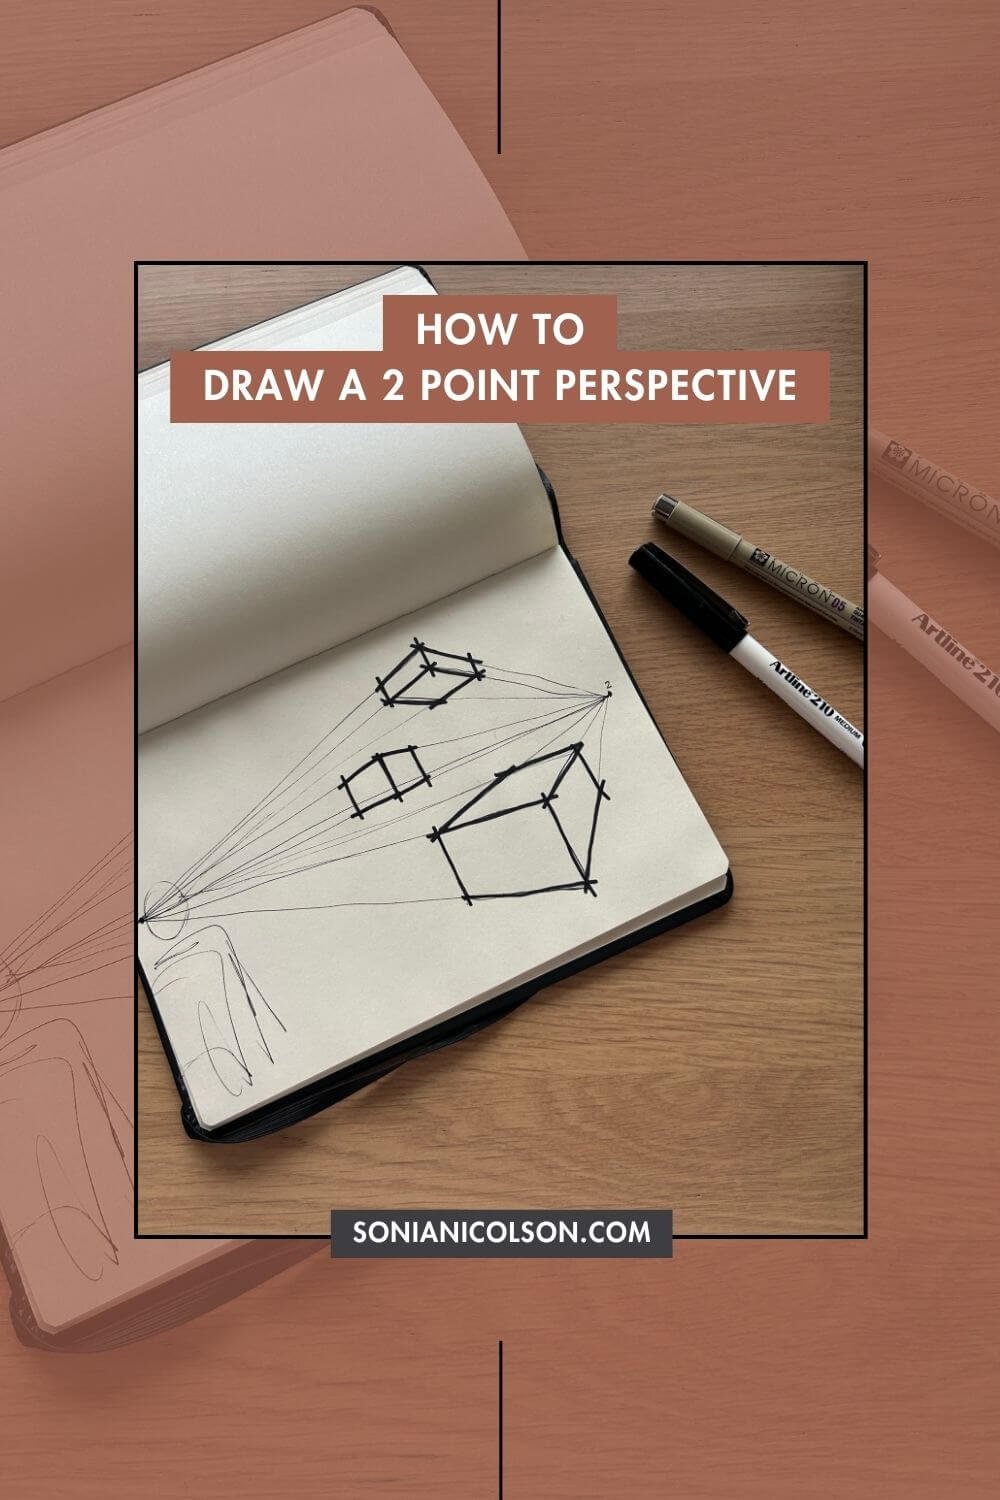 How to 2 point perspective.jpg